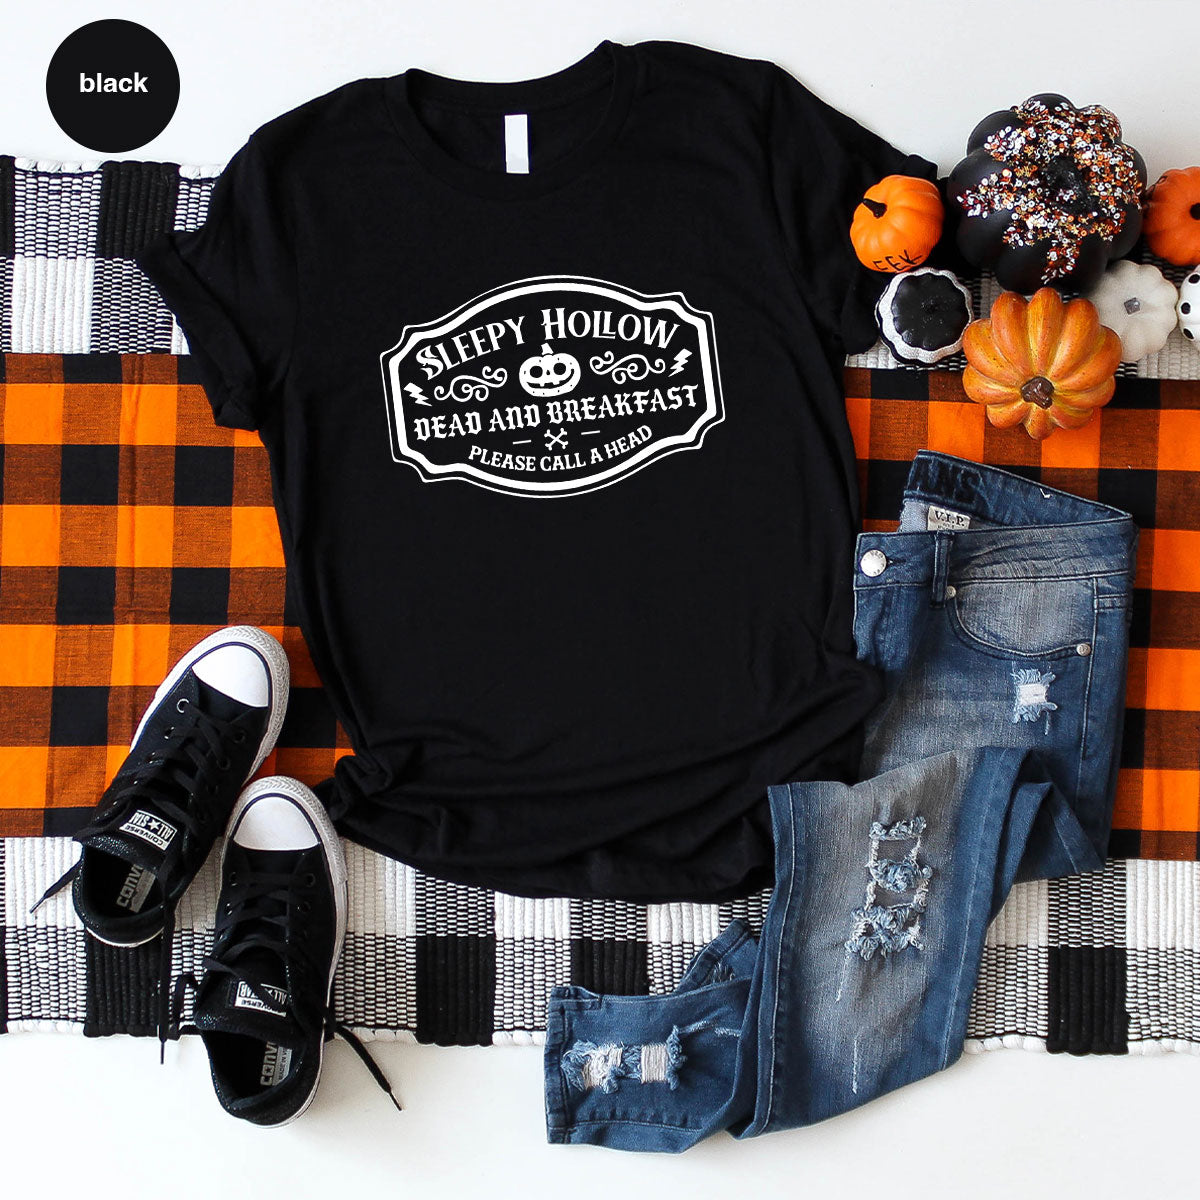 Halloween Sweatshirt, Pumpkin Graphic Tees, Funny Farmer Outfit, Gift for Her, Spooky Season Clothes, Cool Movie VNeck Shirt, Horror T-Shirt